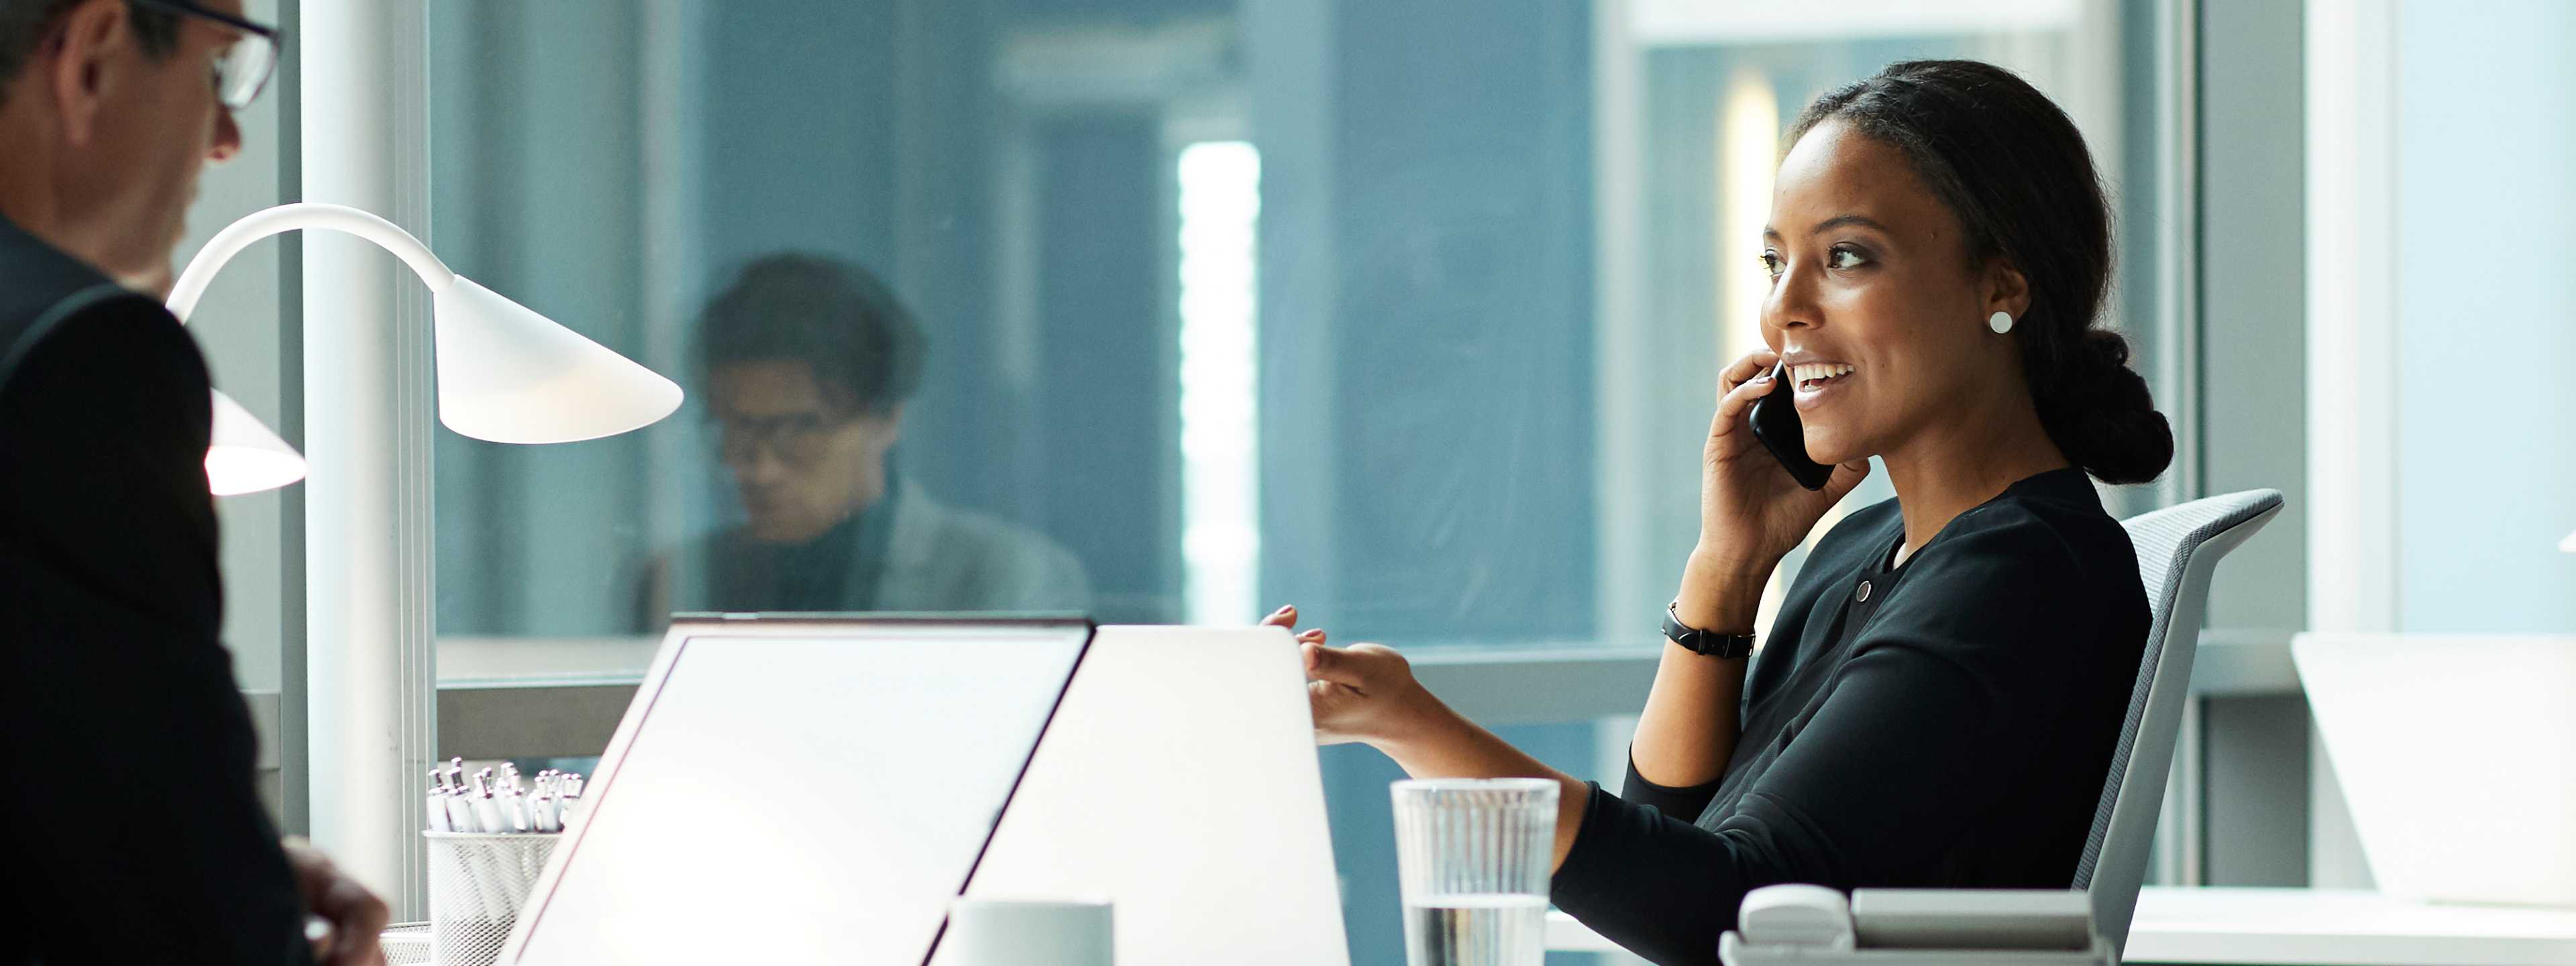 Woman on phone while with colleague